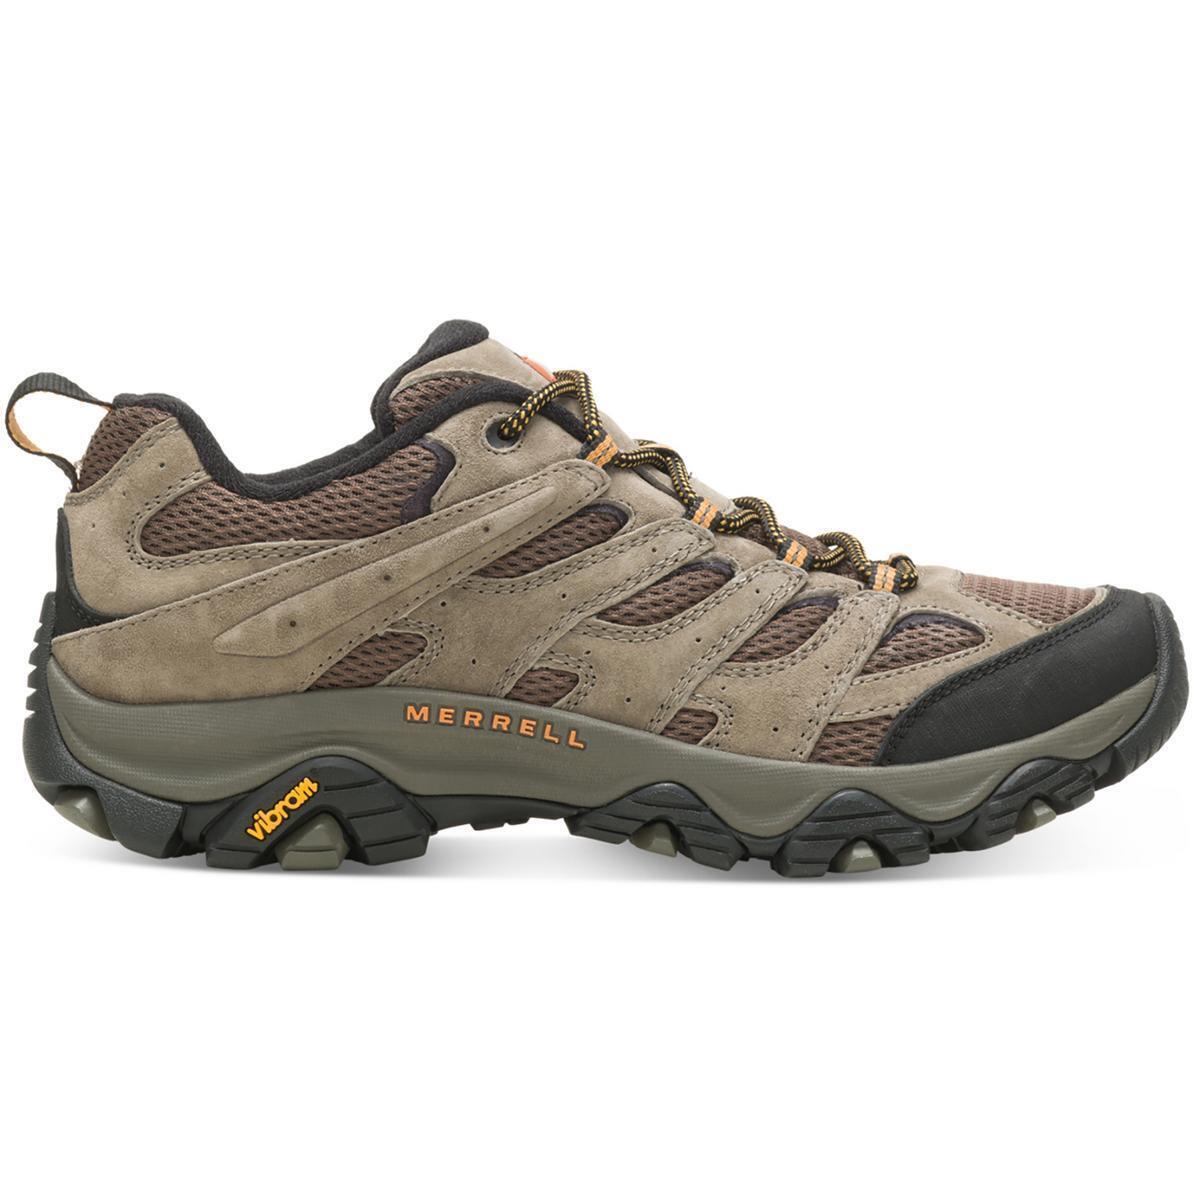 Merrell Womens Moab 2 Vent Suede Hiking Athletic Shoes Sneakers Bhfo 0018 - Grey Suede